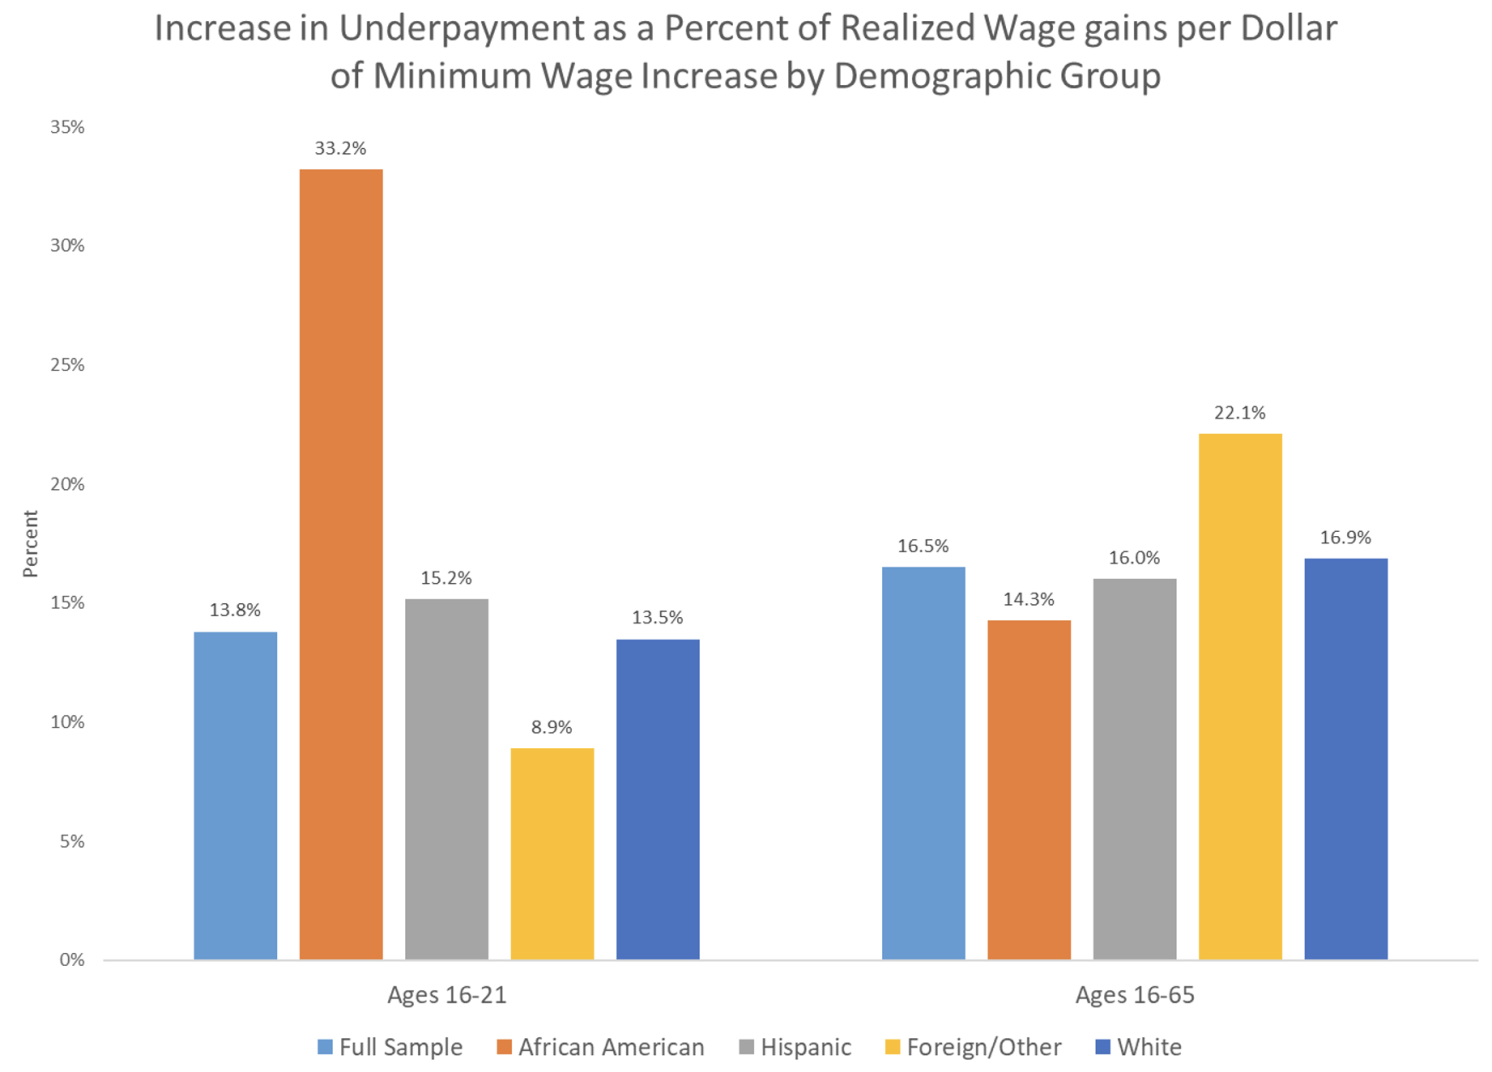 Figure 1 Increase in underpayment as a per cent of realised wage gains per dollar of minimum wage increase by demographic group